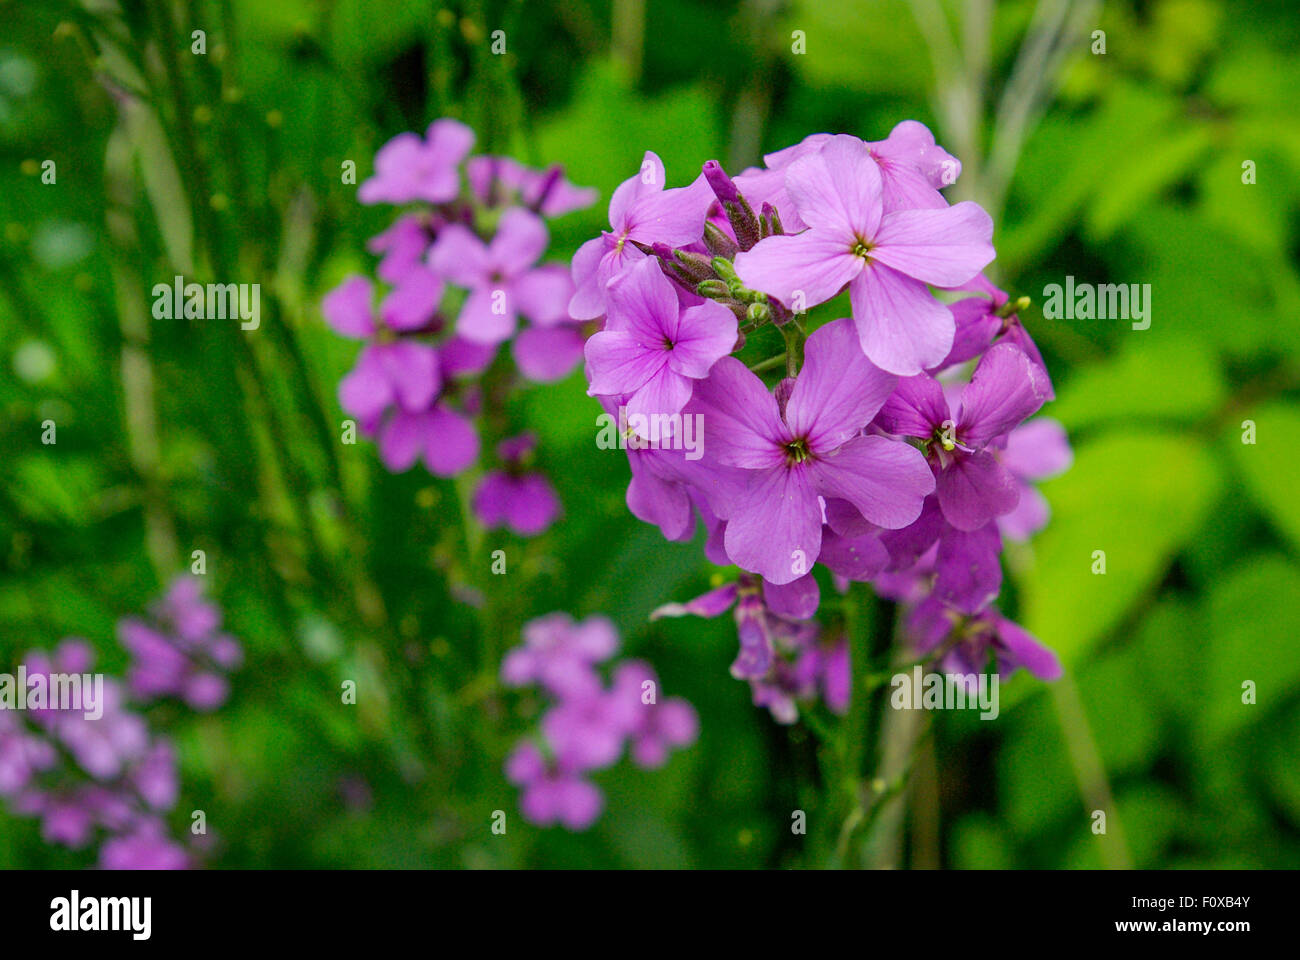 Clusters of small purple flower Dame's Rocket or Hesperis matronalis with the green foliage in the background, Minnesota USA Stock Photo